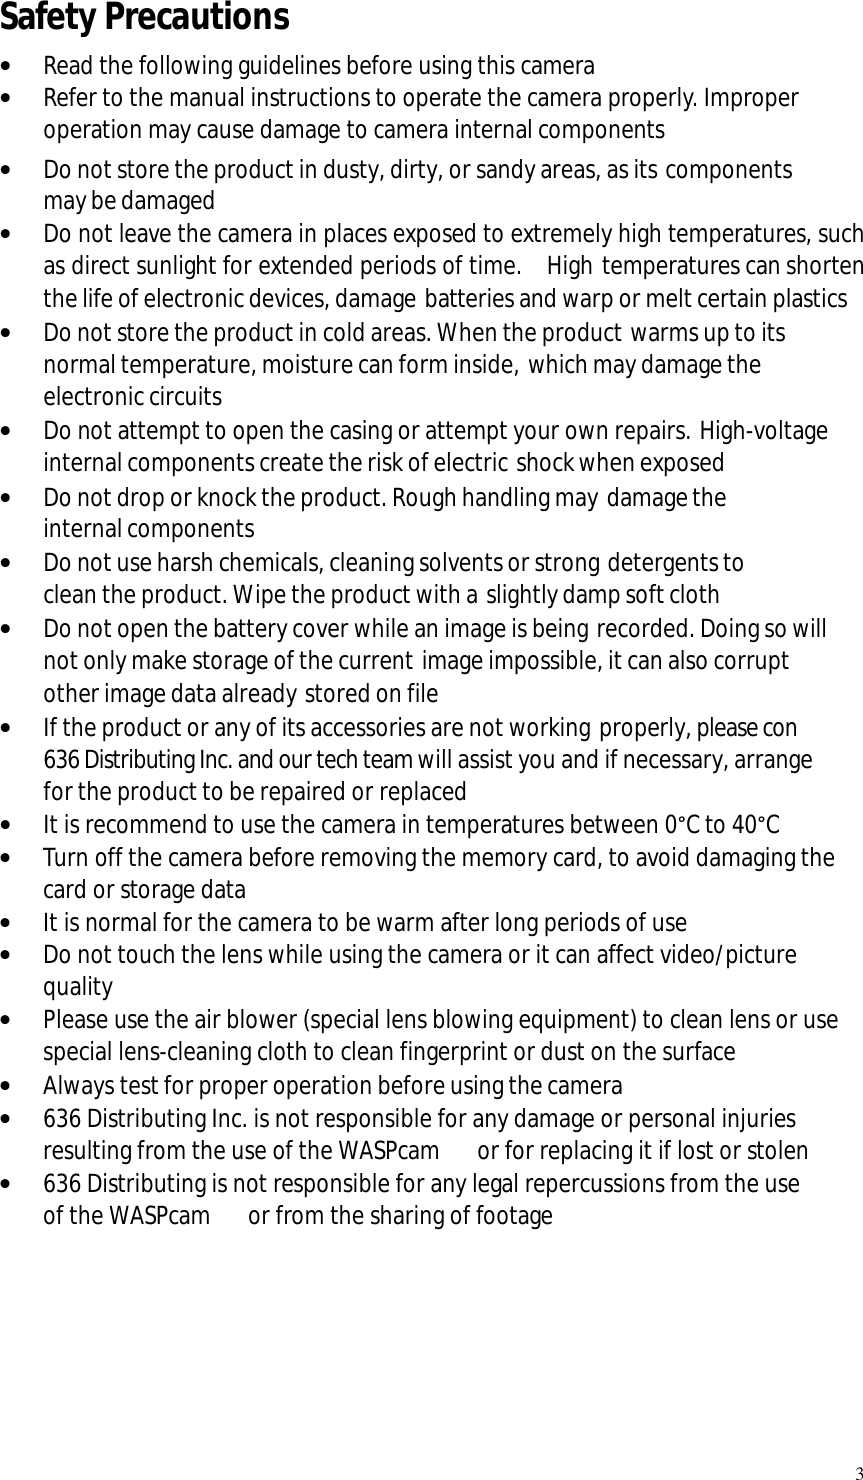   3 Safety Precautions • Read the following guidelines before using this camera • Refer to the manual instructions to operate the camera properly. Improper operation may cause damage to camera internal components • Do not store the product in dusty, dirty, or sandy areas, as its components may be damaged • Do not leave the camera in places exposed to extremely high temperatures, such as direct sunlight for extended periods of time.  High temperatures can shorten the life of electronic devices, damage batteries and warp or melt certain plastics • Do not store the product in cold areas. When the product warms up to its normal temperature, moisture can form inside, which may damage the electronic circuits • Do not attempt to open the casing or attempt your own repairs. High-voltage internal components create the risk of electric shock when exposed • Do not drop or knock the product. Rough handling may damage the internal components • Do not use harsh chemicals, cleaning solvents or strong detergents to clean the product. Wipe the product with a slightly damp soft cloth • Do not open the battery cover while an image is being recorded. Doing so will not only make storage of the current image impossible, it can also corrupt other image data already stored on file • If the product or any of its accessories are not working properly, please con  636 Distributing Inc. and our tech team will assist you and if necessary, arrange for the product to be repaired or replaced • It is recommend to use the camera in temperatures between 0°C to 40°C • Turn off the camera before removing the memory card, to avoid damaging the card or storage data • It is normal for the camera to be warm after long periods of use  • Do not touch the lens while using the camera or it can affect video/picture quality • Please use the air blower (special lens blowing equipment) to clean lens or use special lens-cleaning cloth to clean fingerprint or dust on the surface • Always test for proper operation before using the camera • 636 Distributing Inc. is not responsible for any damage or personal injuries resulting from the use of the WASPcam   or for replacing it if lost or stolen • 636 Distributing is not responsible for any legal repercussions from the use of the WASPcam   or from the sharing of footage      